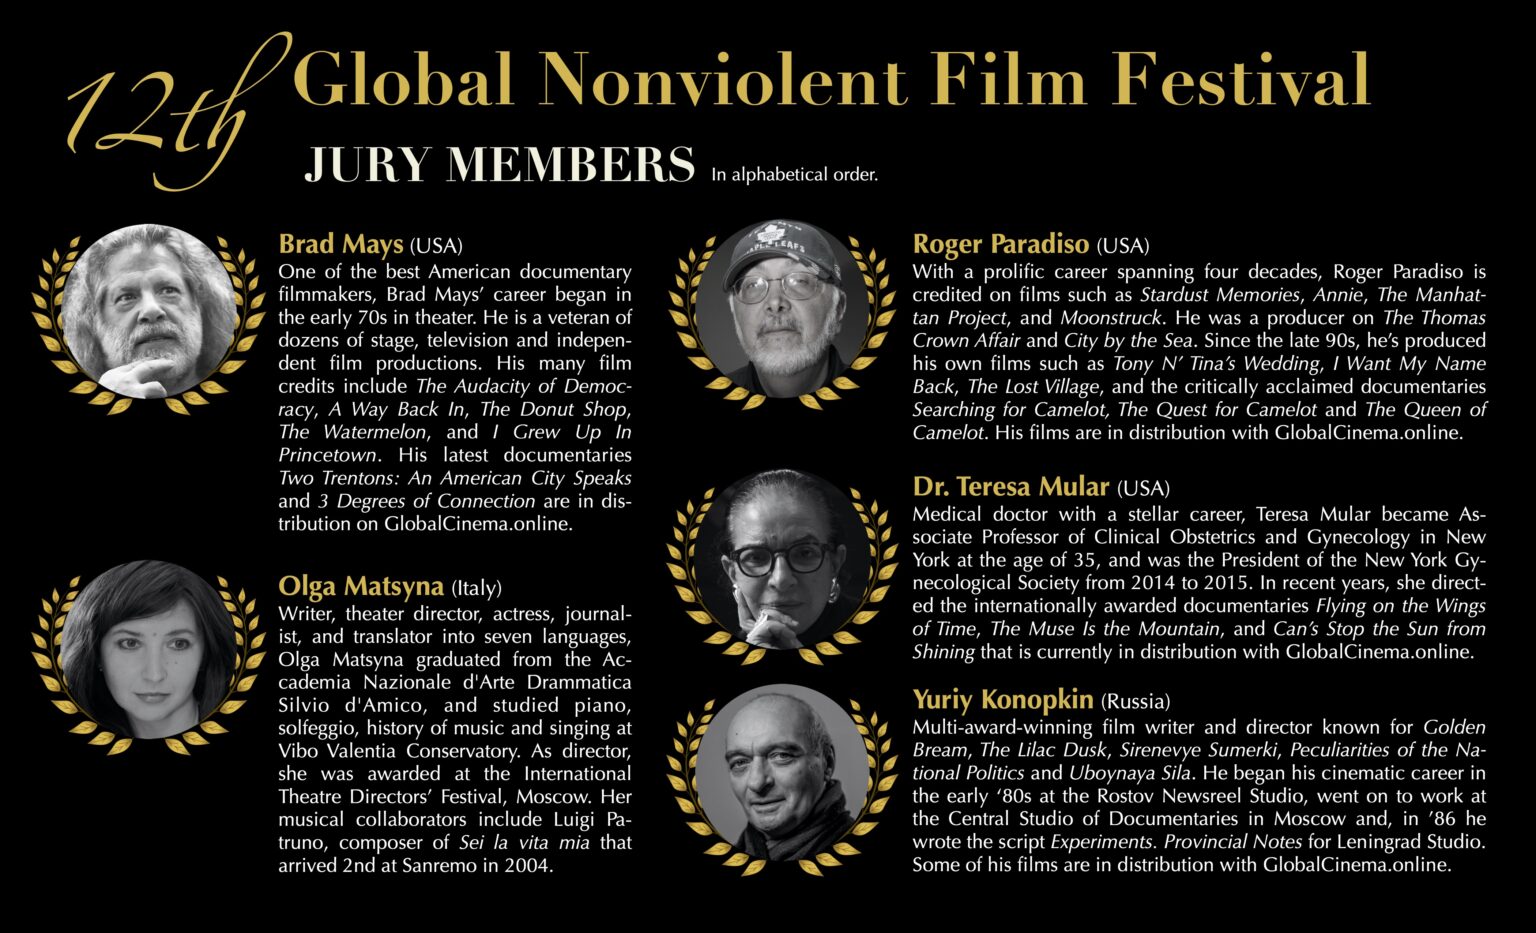 Film personalities convened as members of the Jury for the Global Nonviolent Film Festival 2023. Here's everything you need to know.